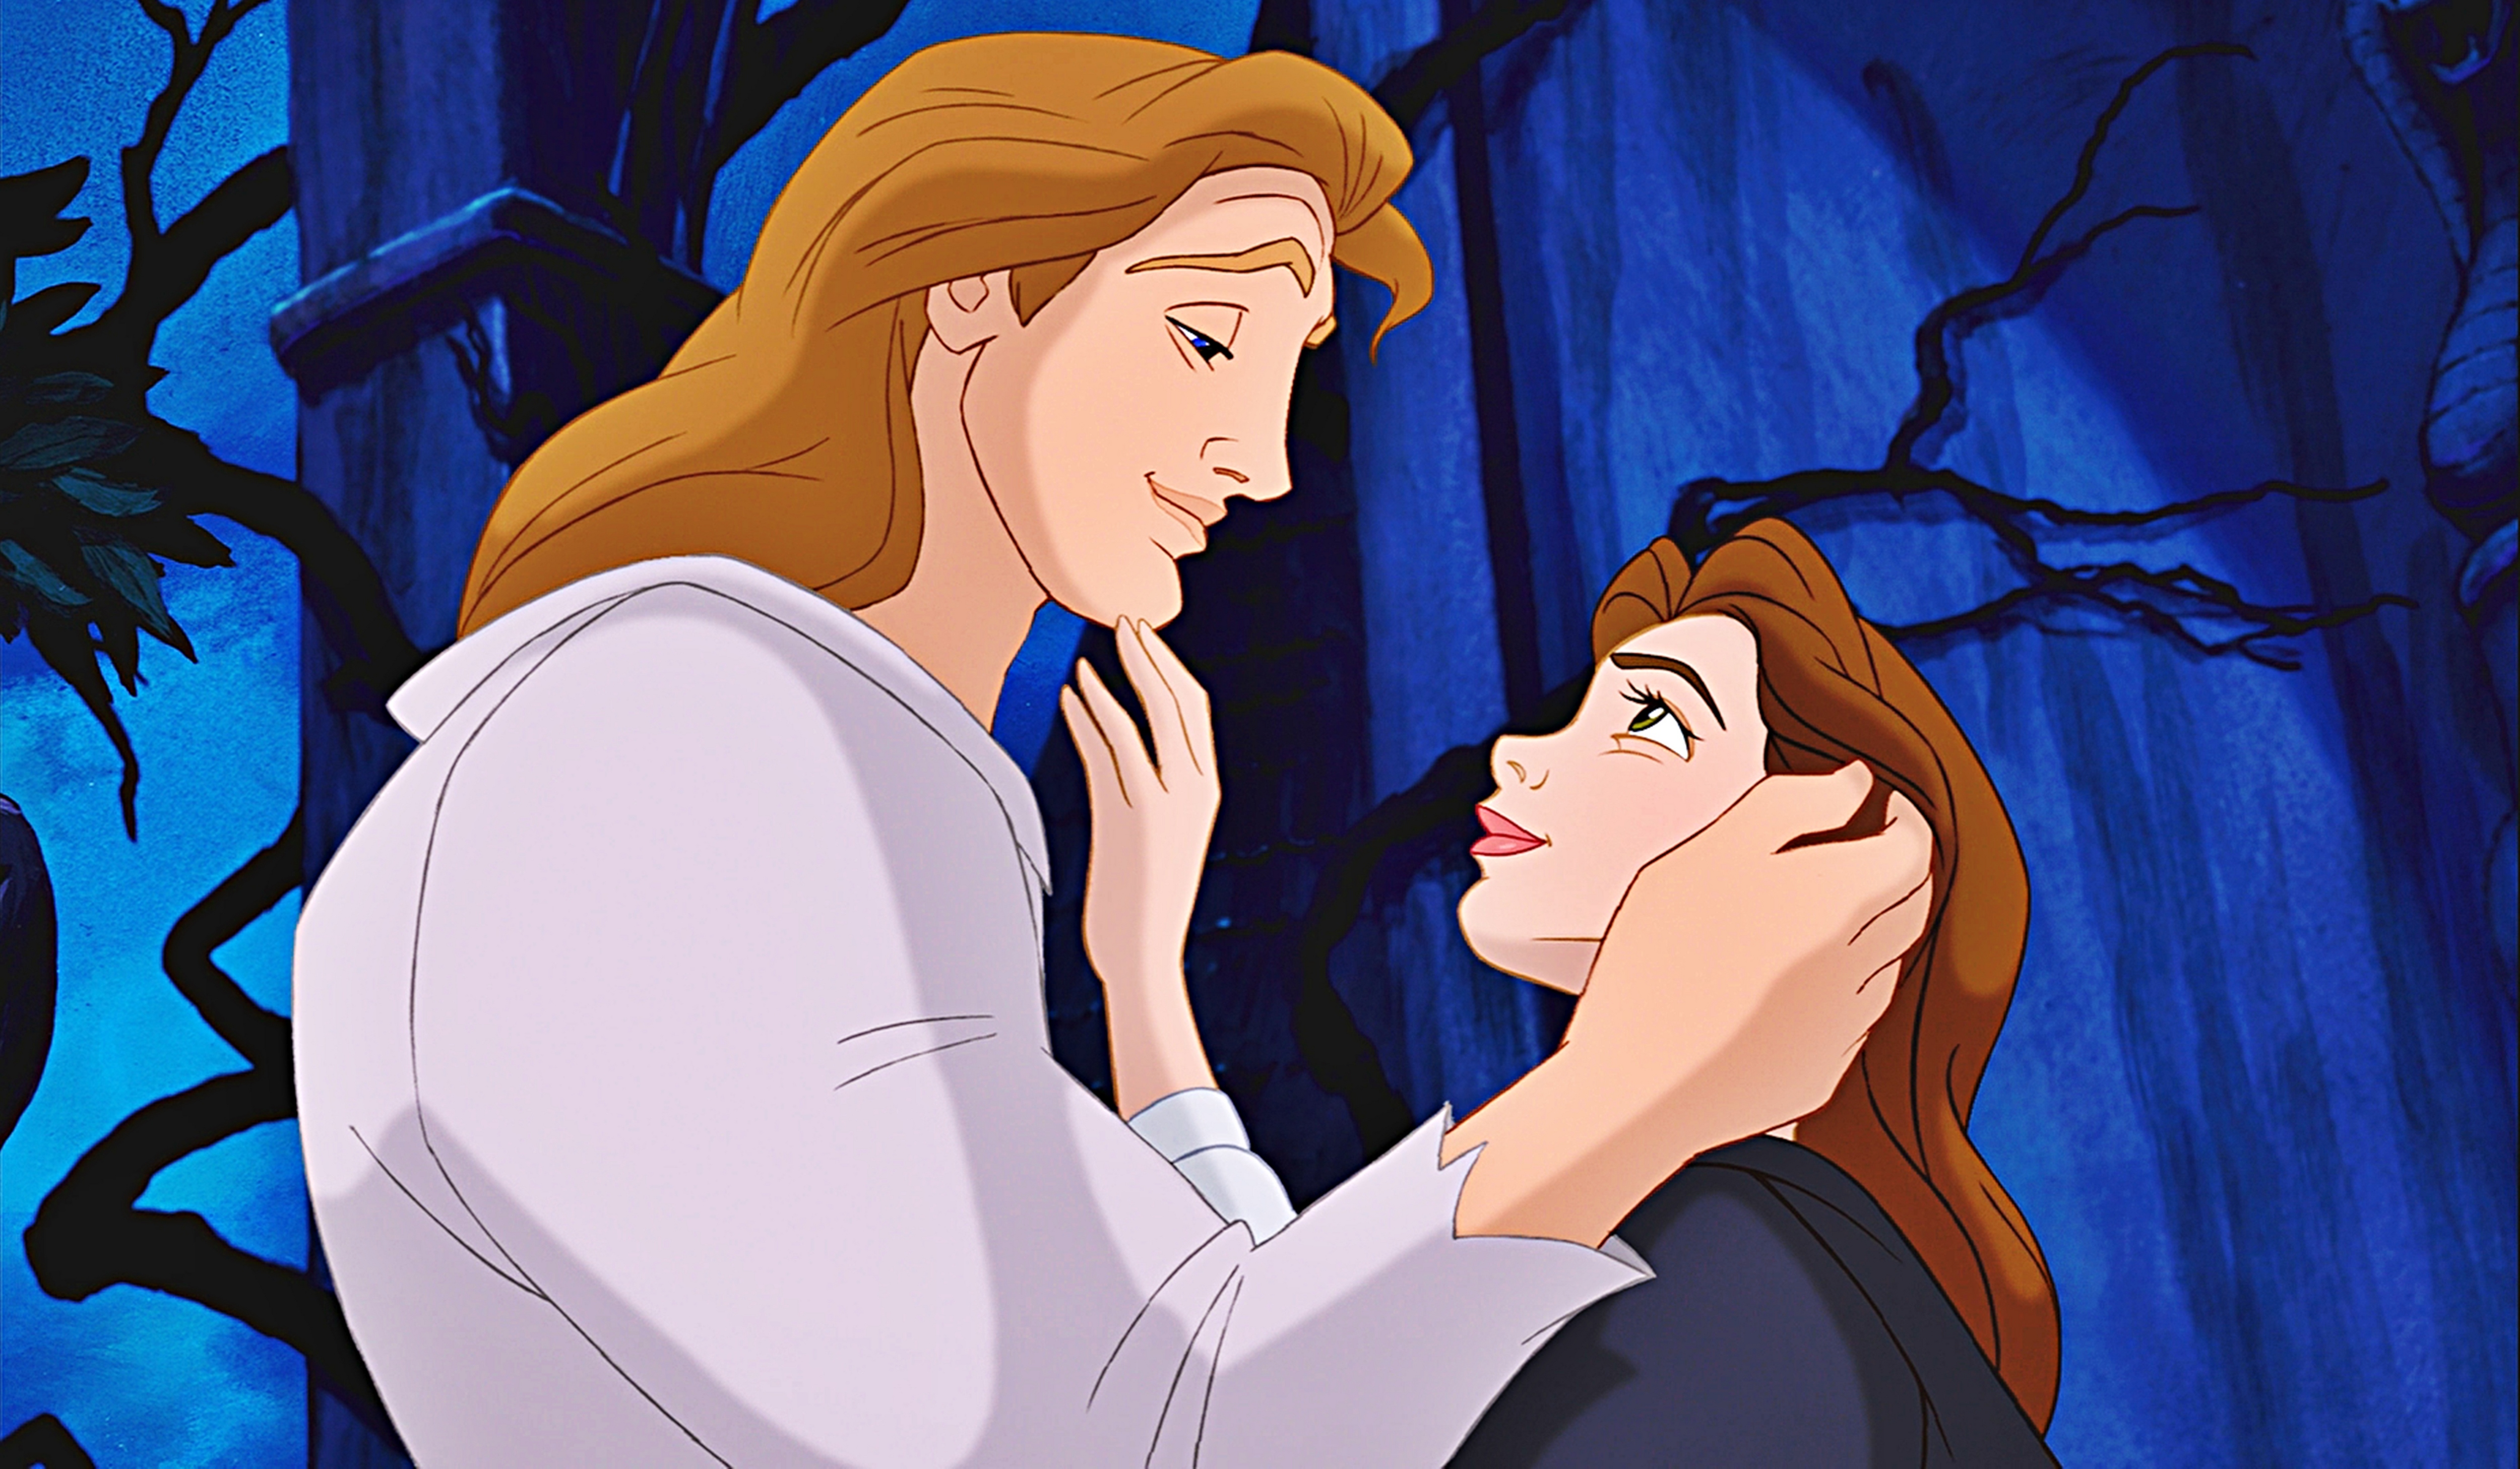 Beauty And The Beast Animated Prince - HD Wallpaper 